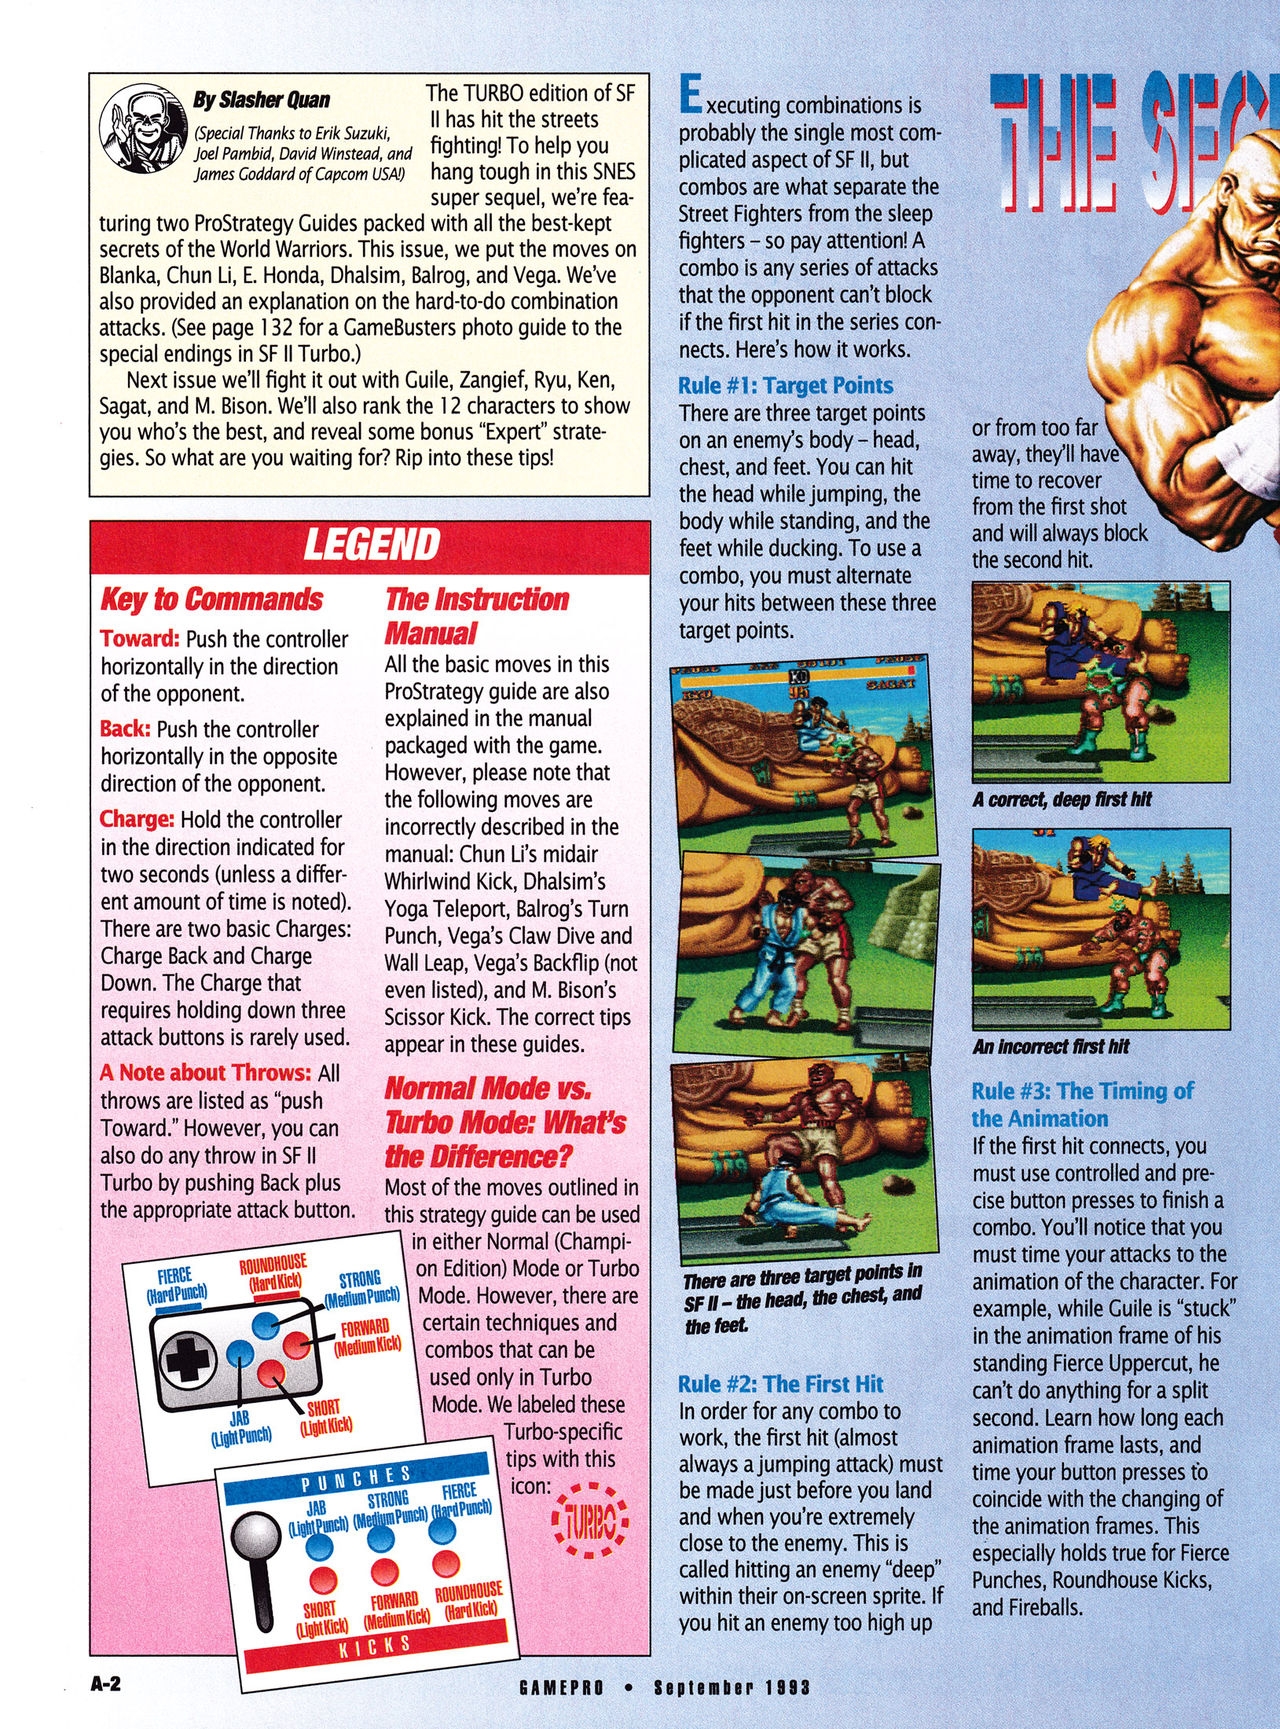 Street Fighter II Turbo Straegy Guide Part 1 1